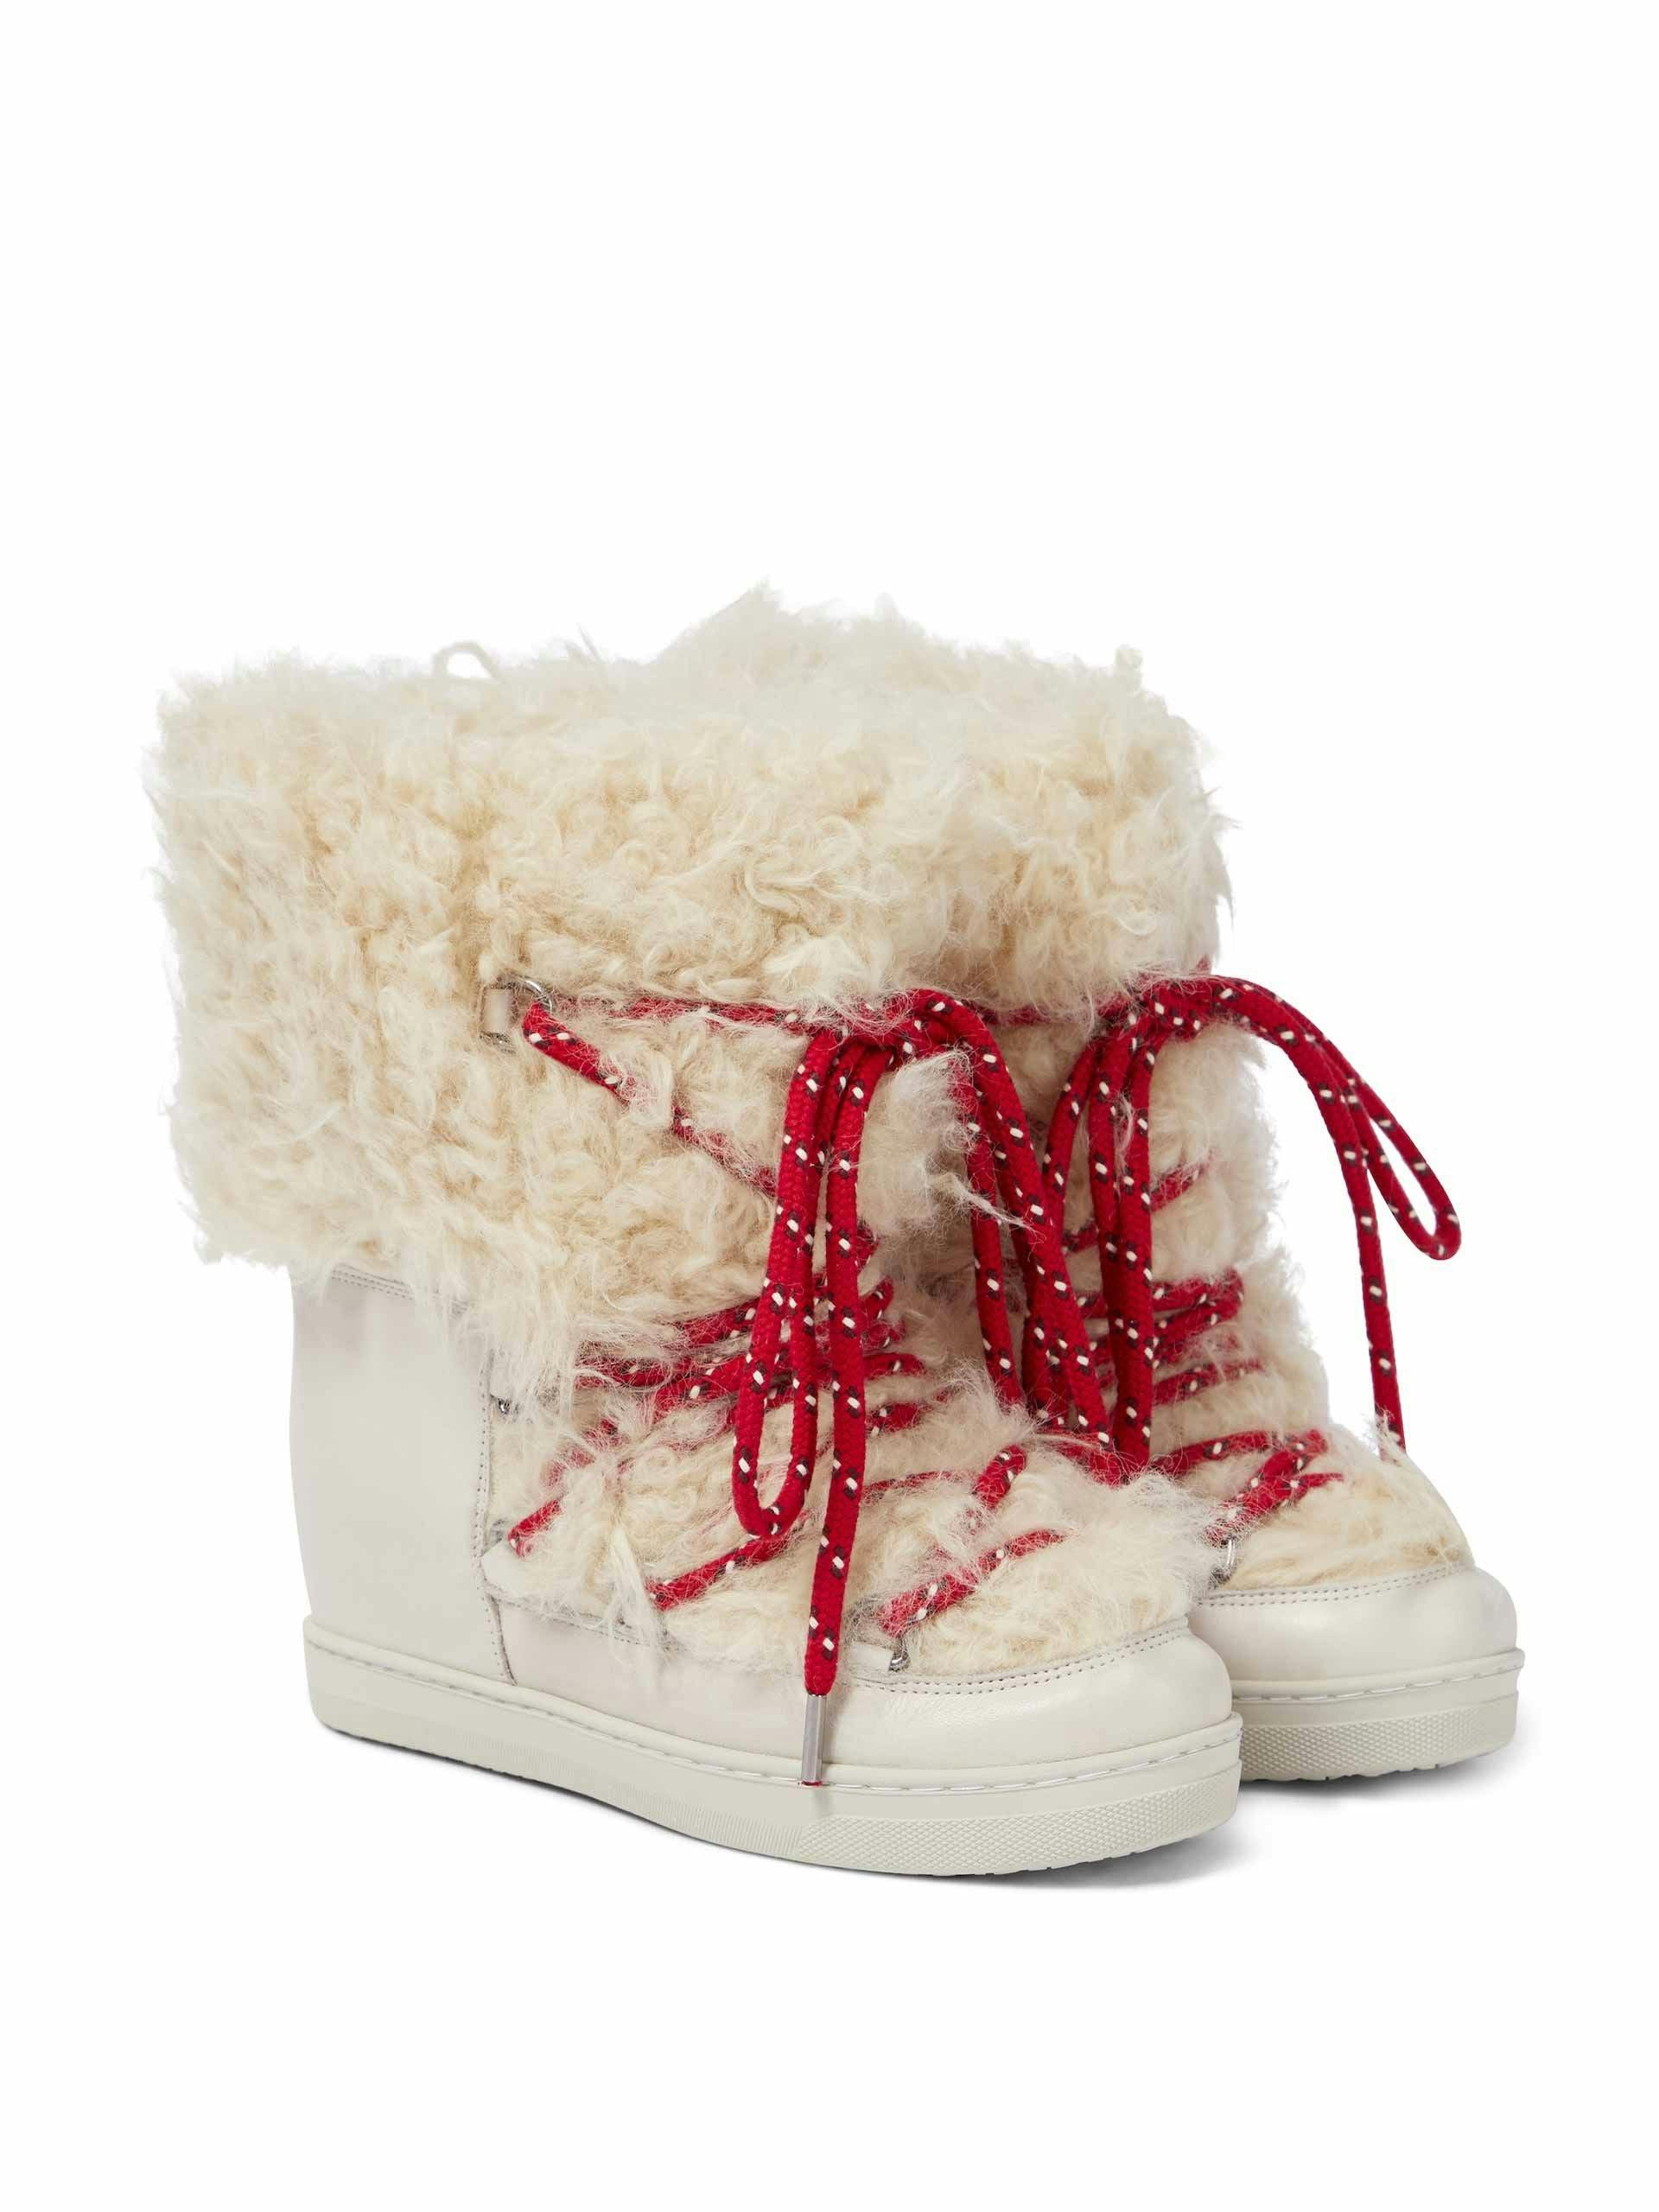 Faux shearling and leather snow boots